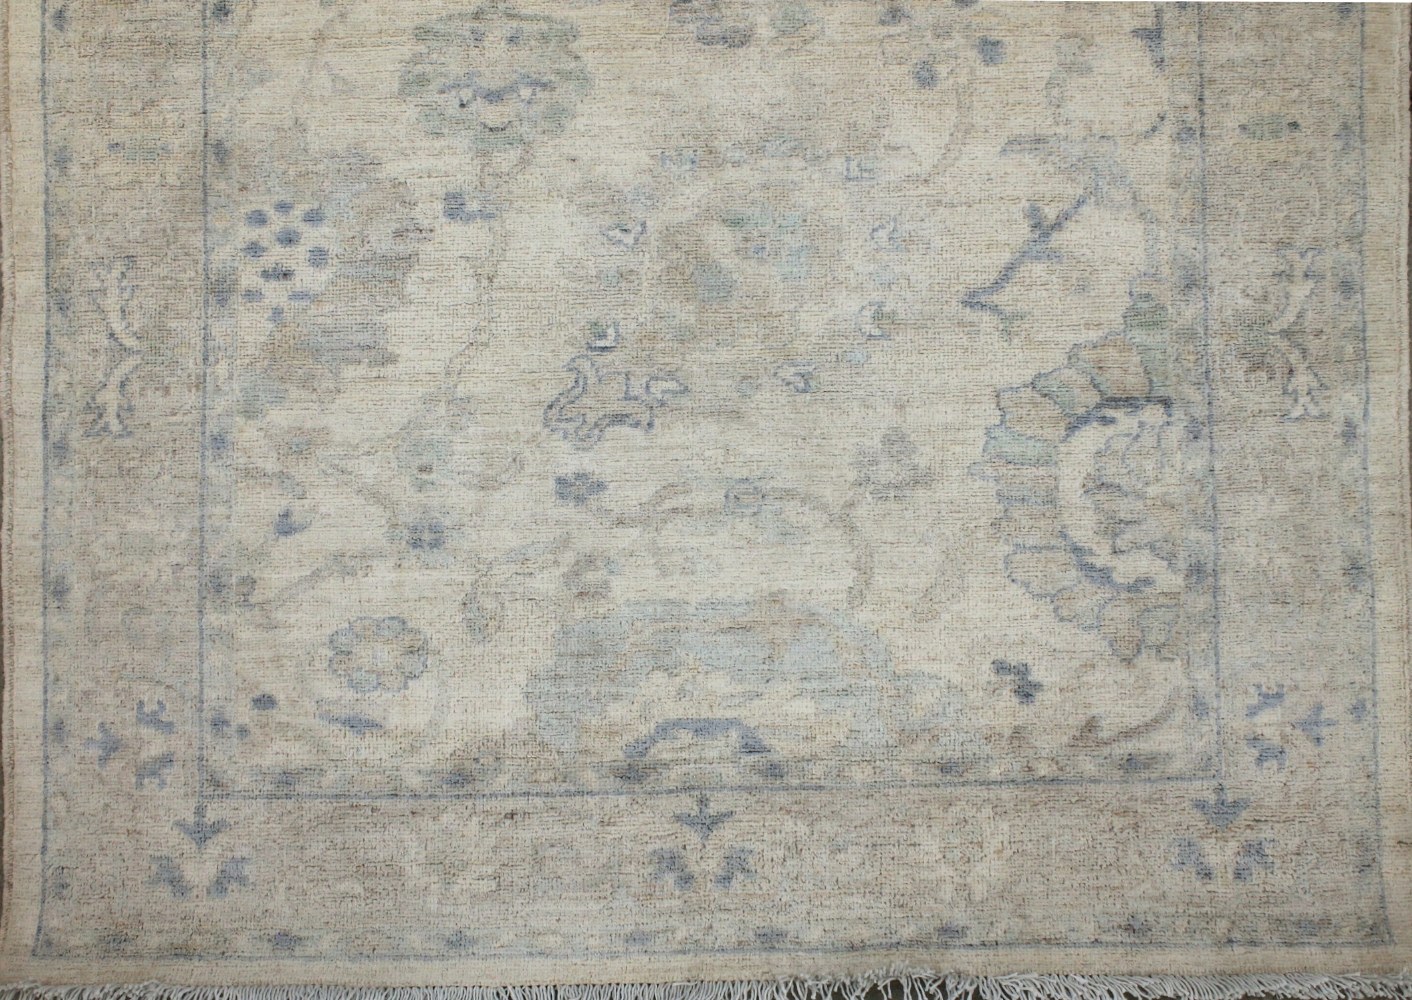 4x6 Aryana & Antique Revivals Hand Knotted Wool Area Rug - MR028826